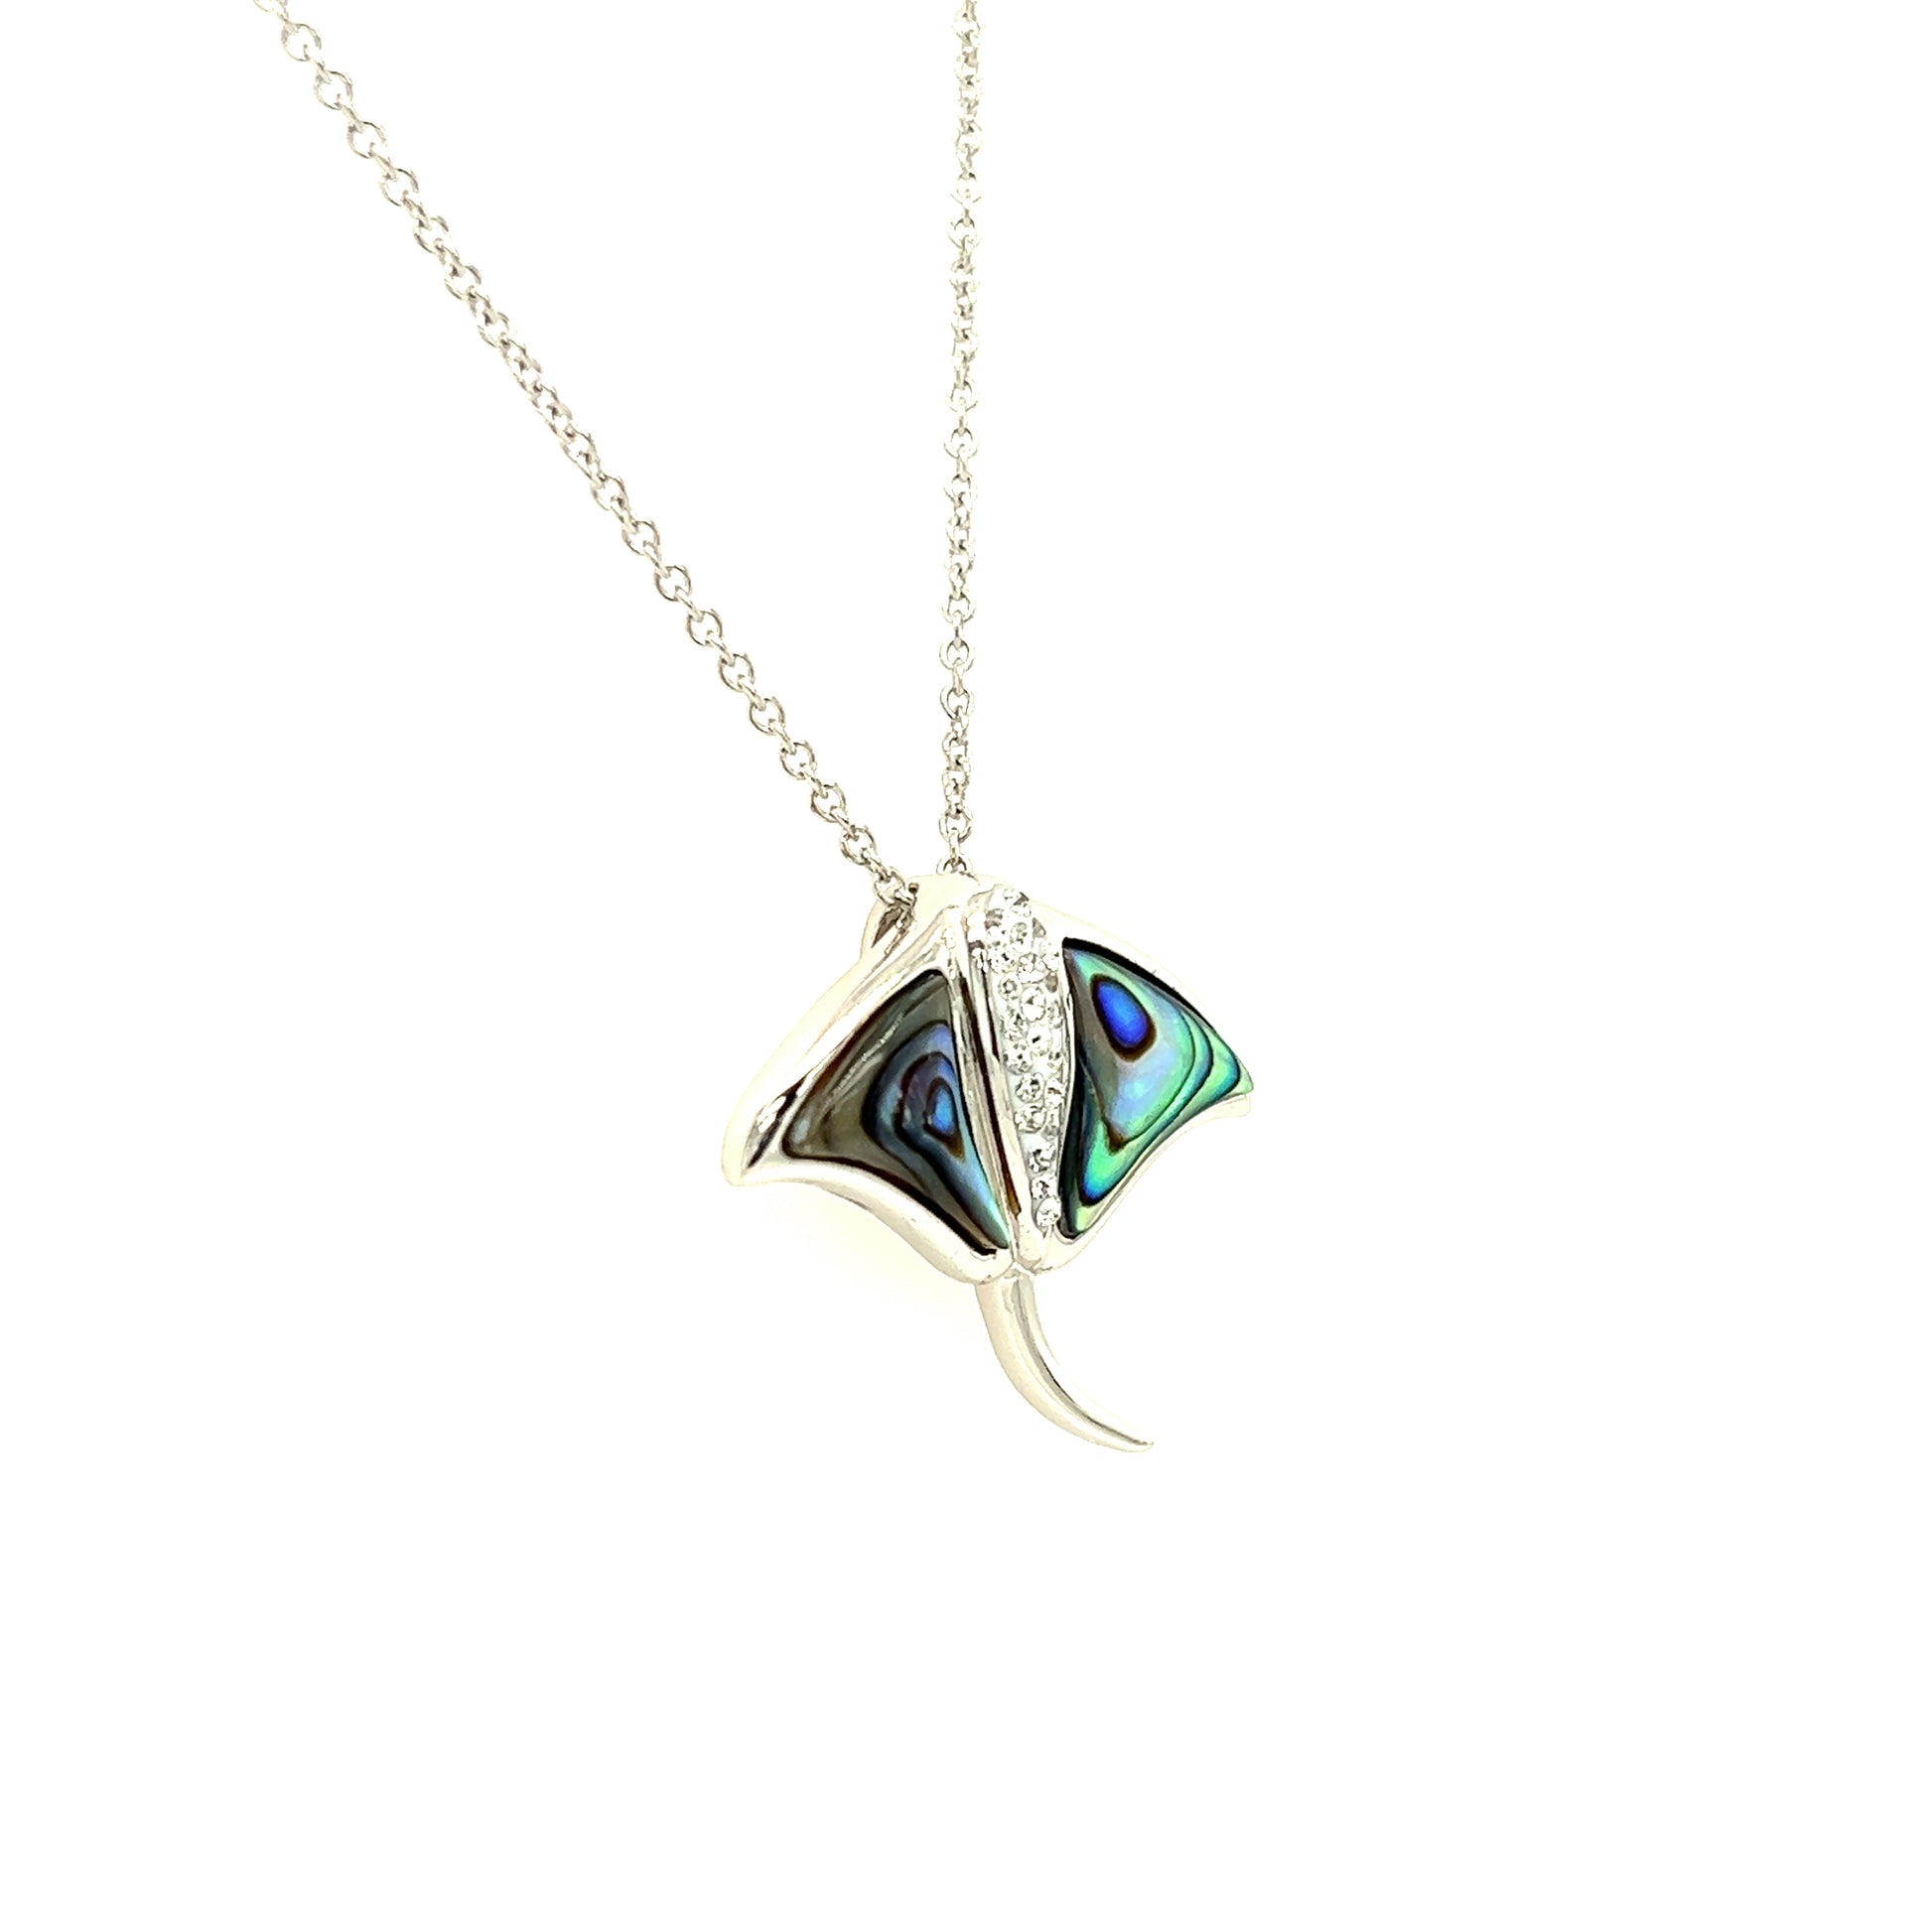 Manta Ray Necklace with Abalone Shell and White Crystals in Sterling Silver Left Side View